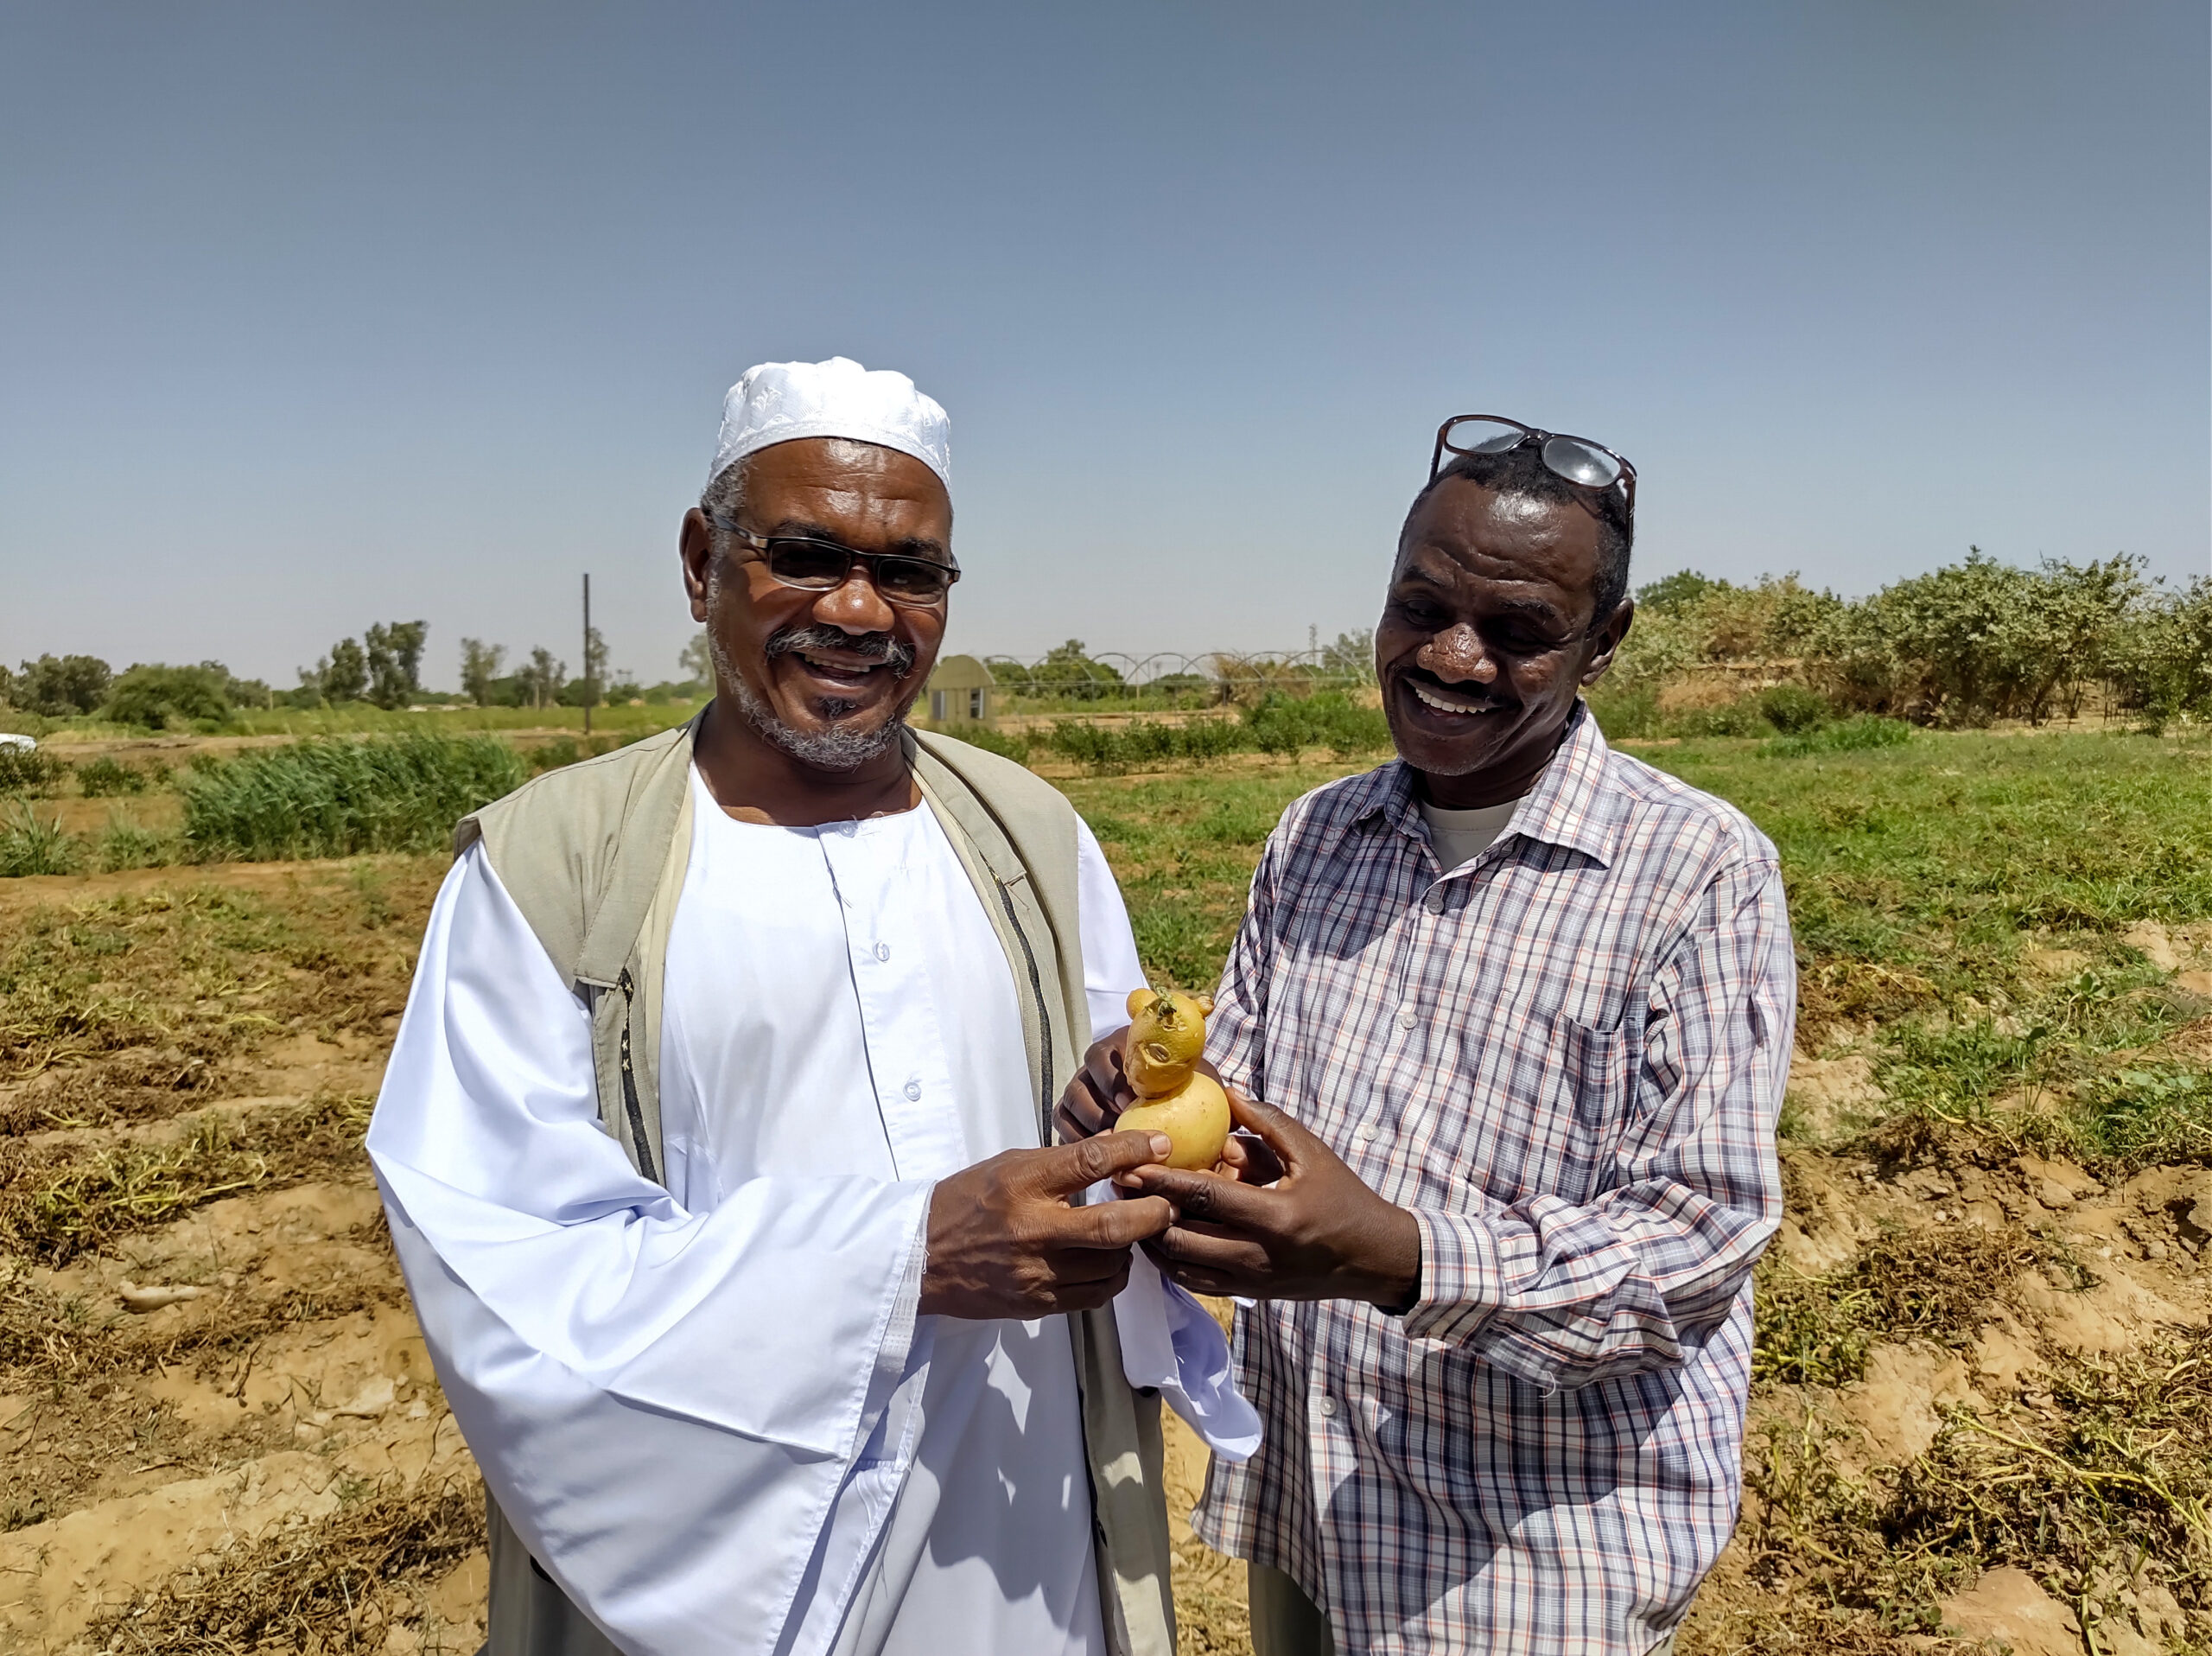 Two men standing in a field smiling while holding a small, yellow, duck-shaped object together. One man wears traditional white clothing and a white cap; the other wears a checkered shirt and glasses.